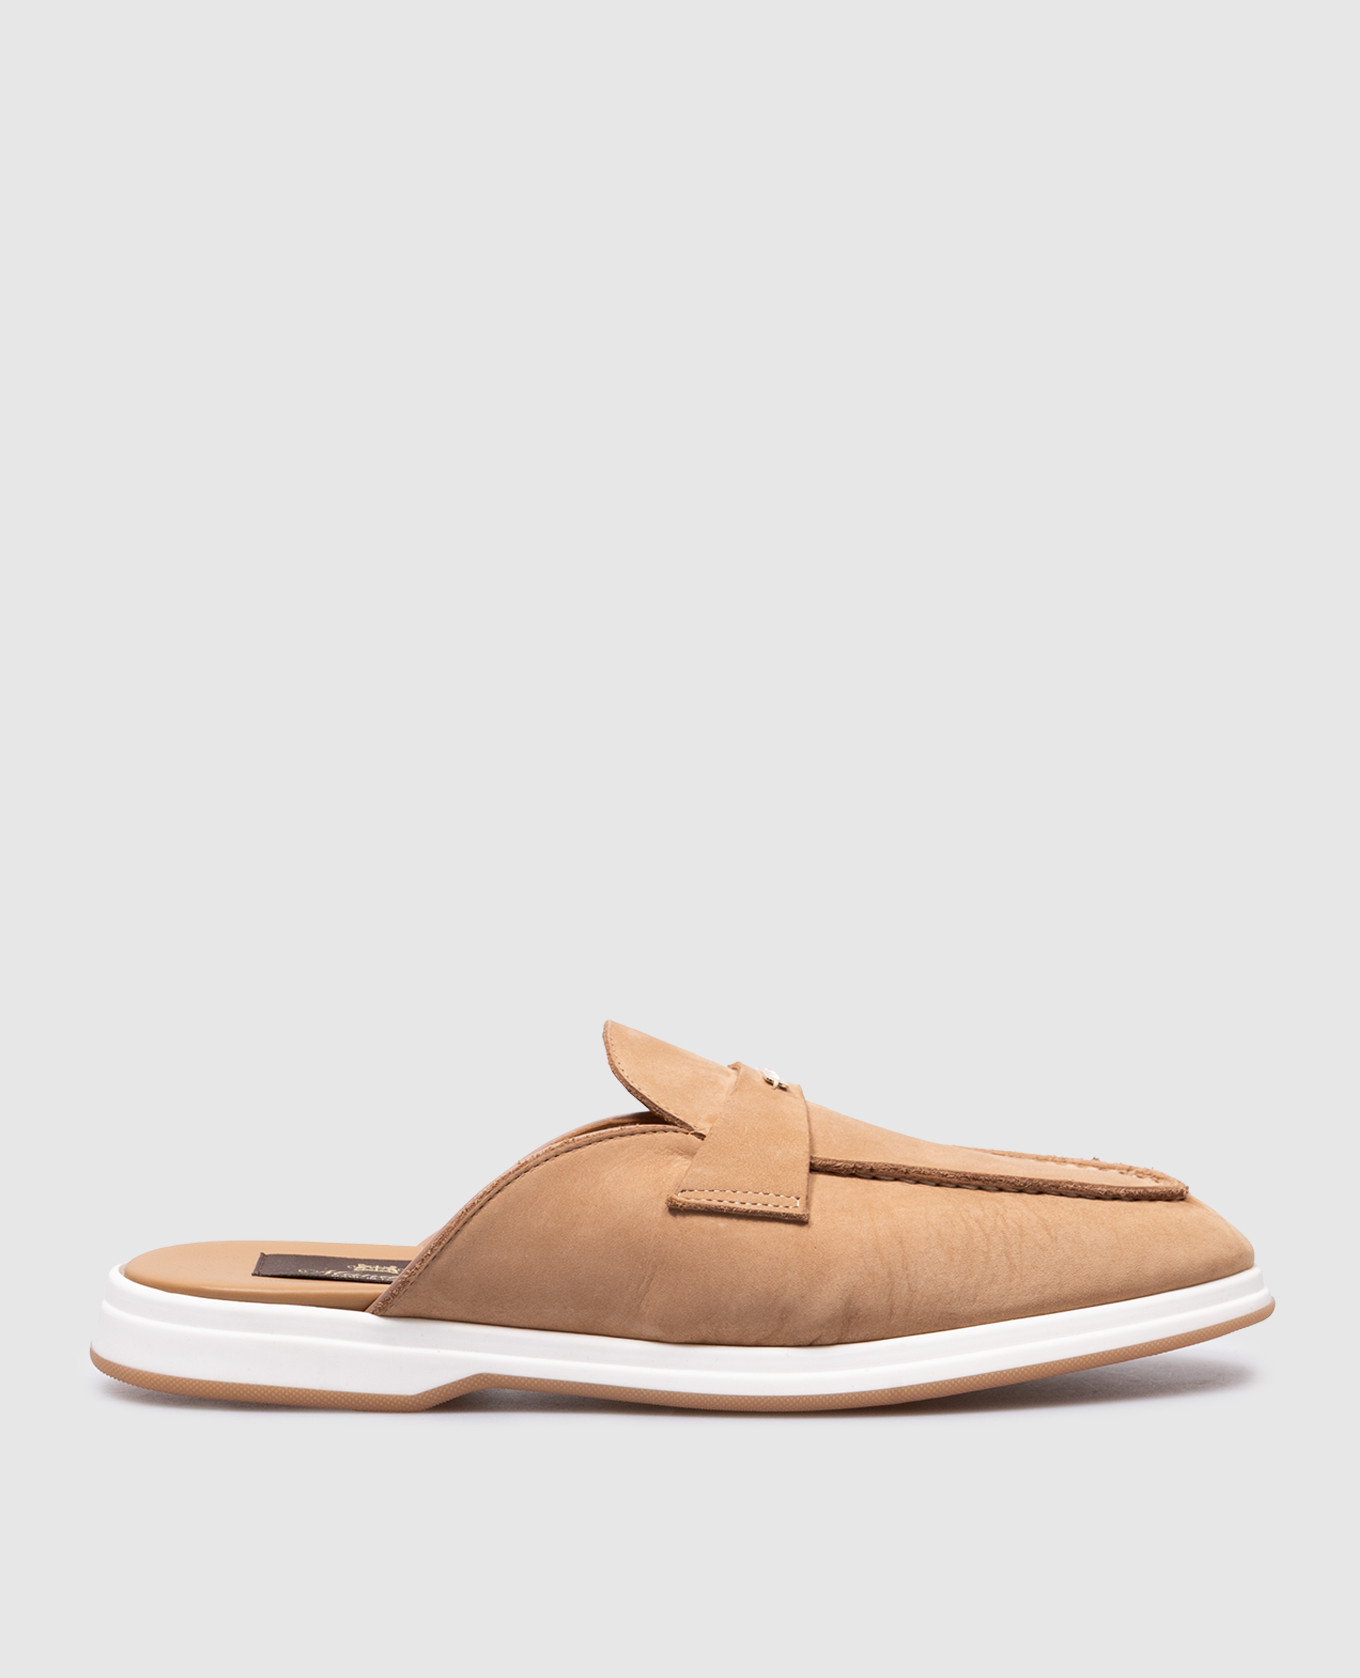 Beige suede mules with metallic logo